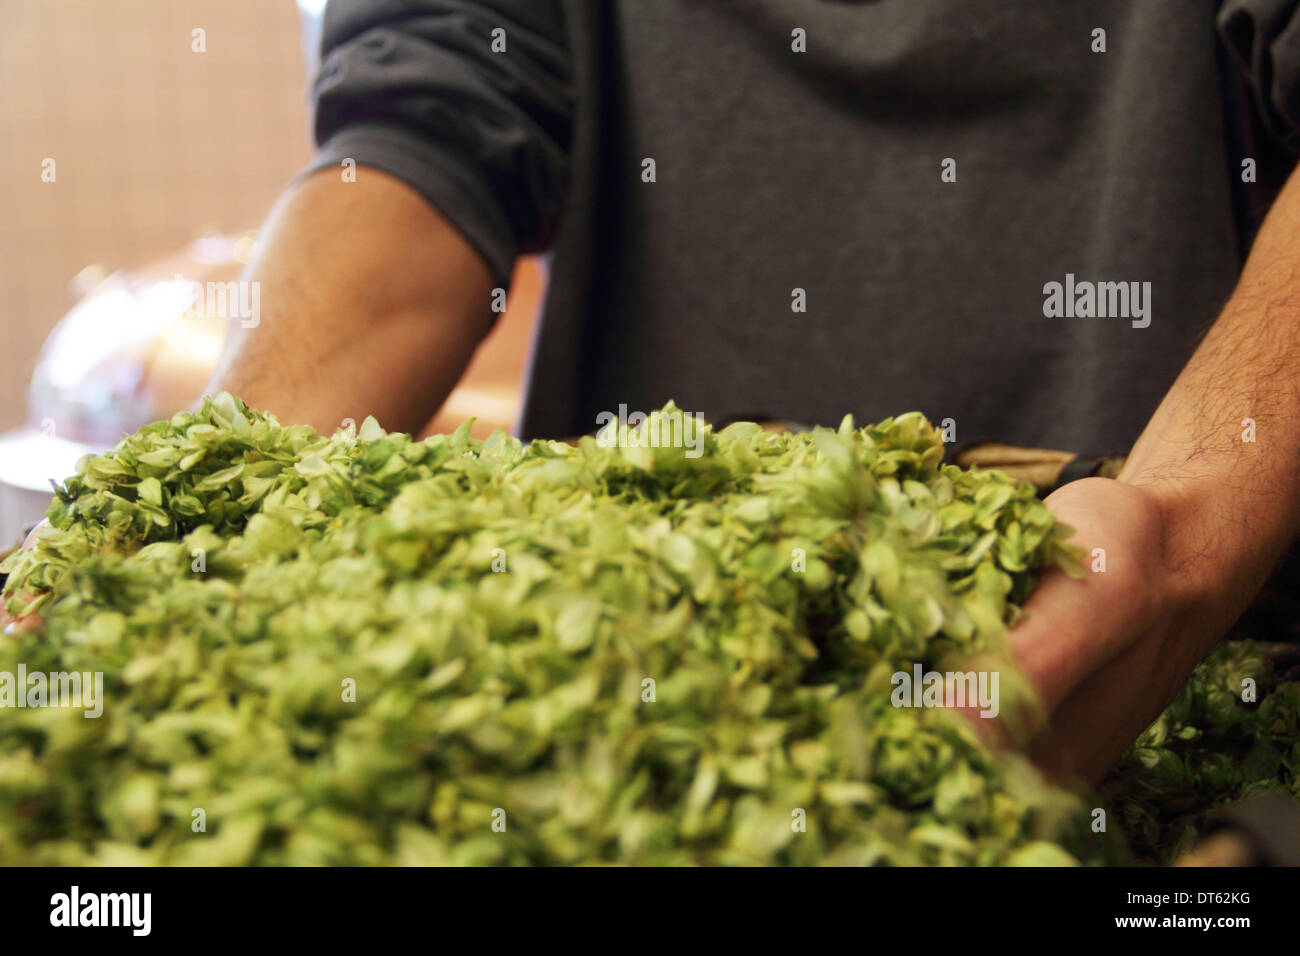 Man holding hops in brewery Stock Photo